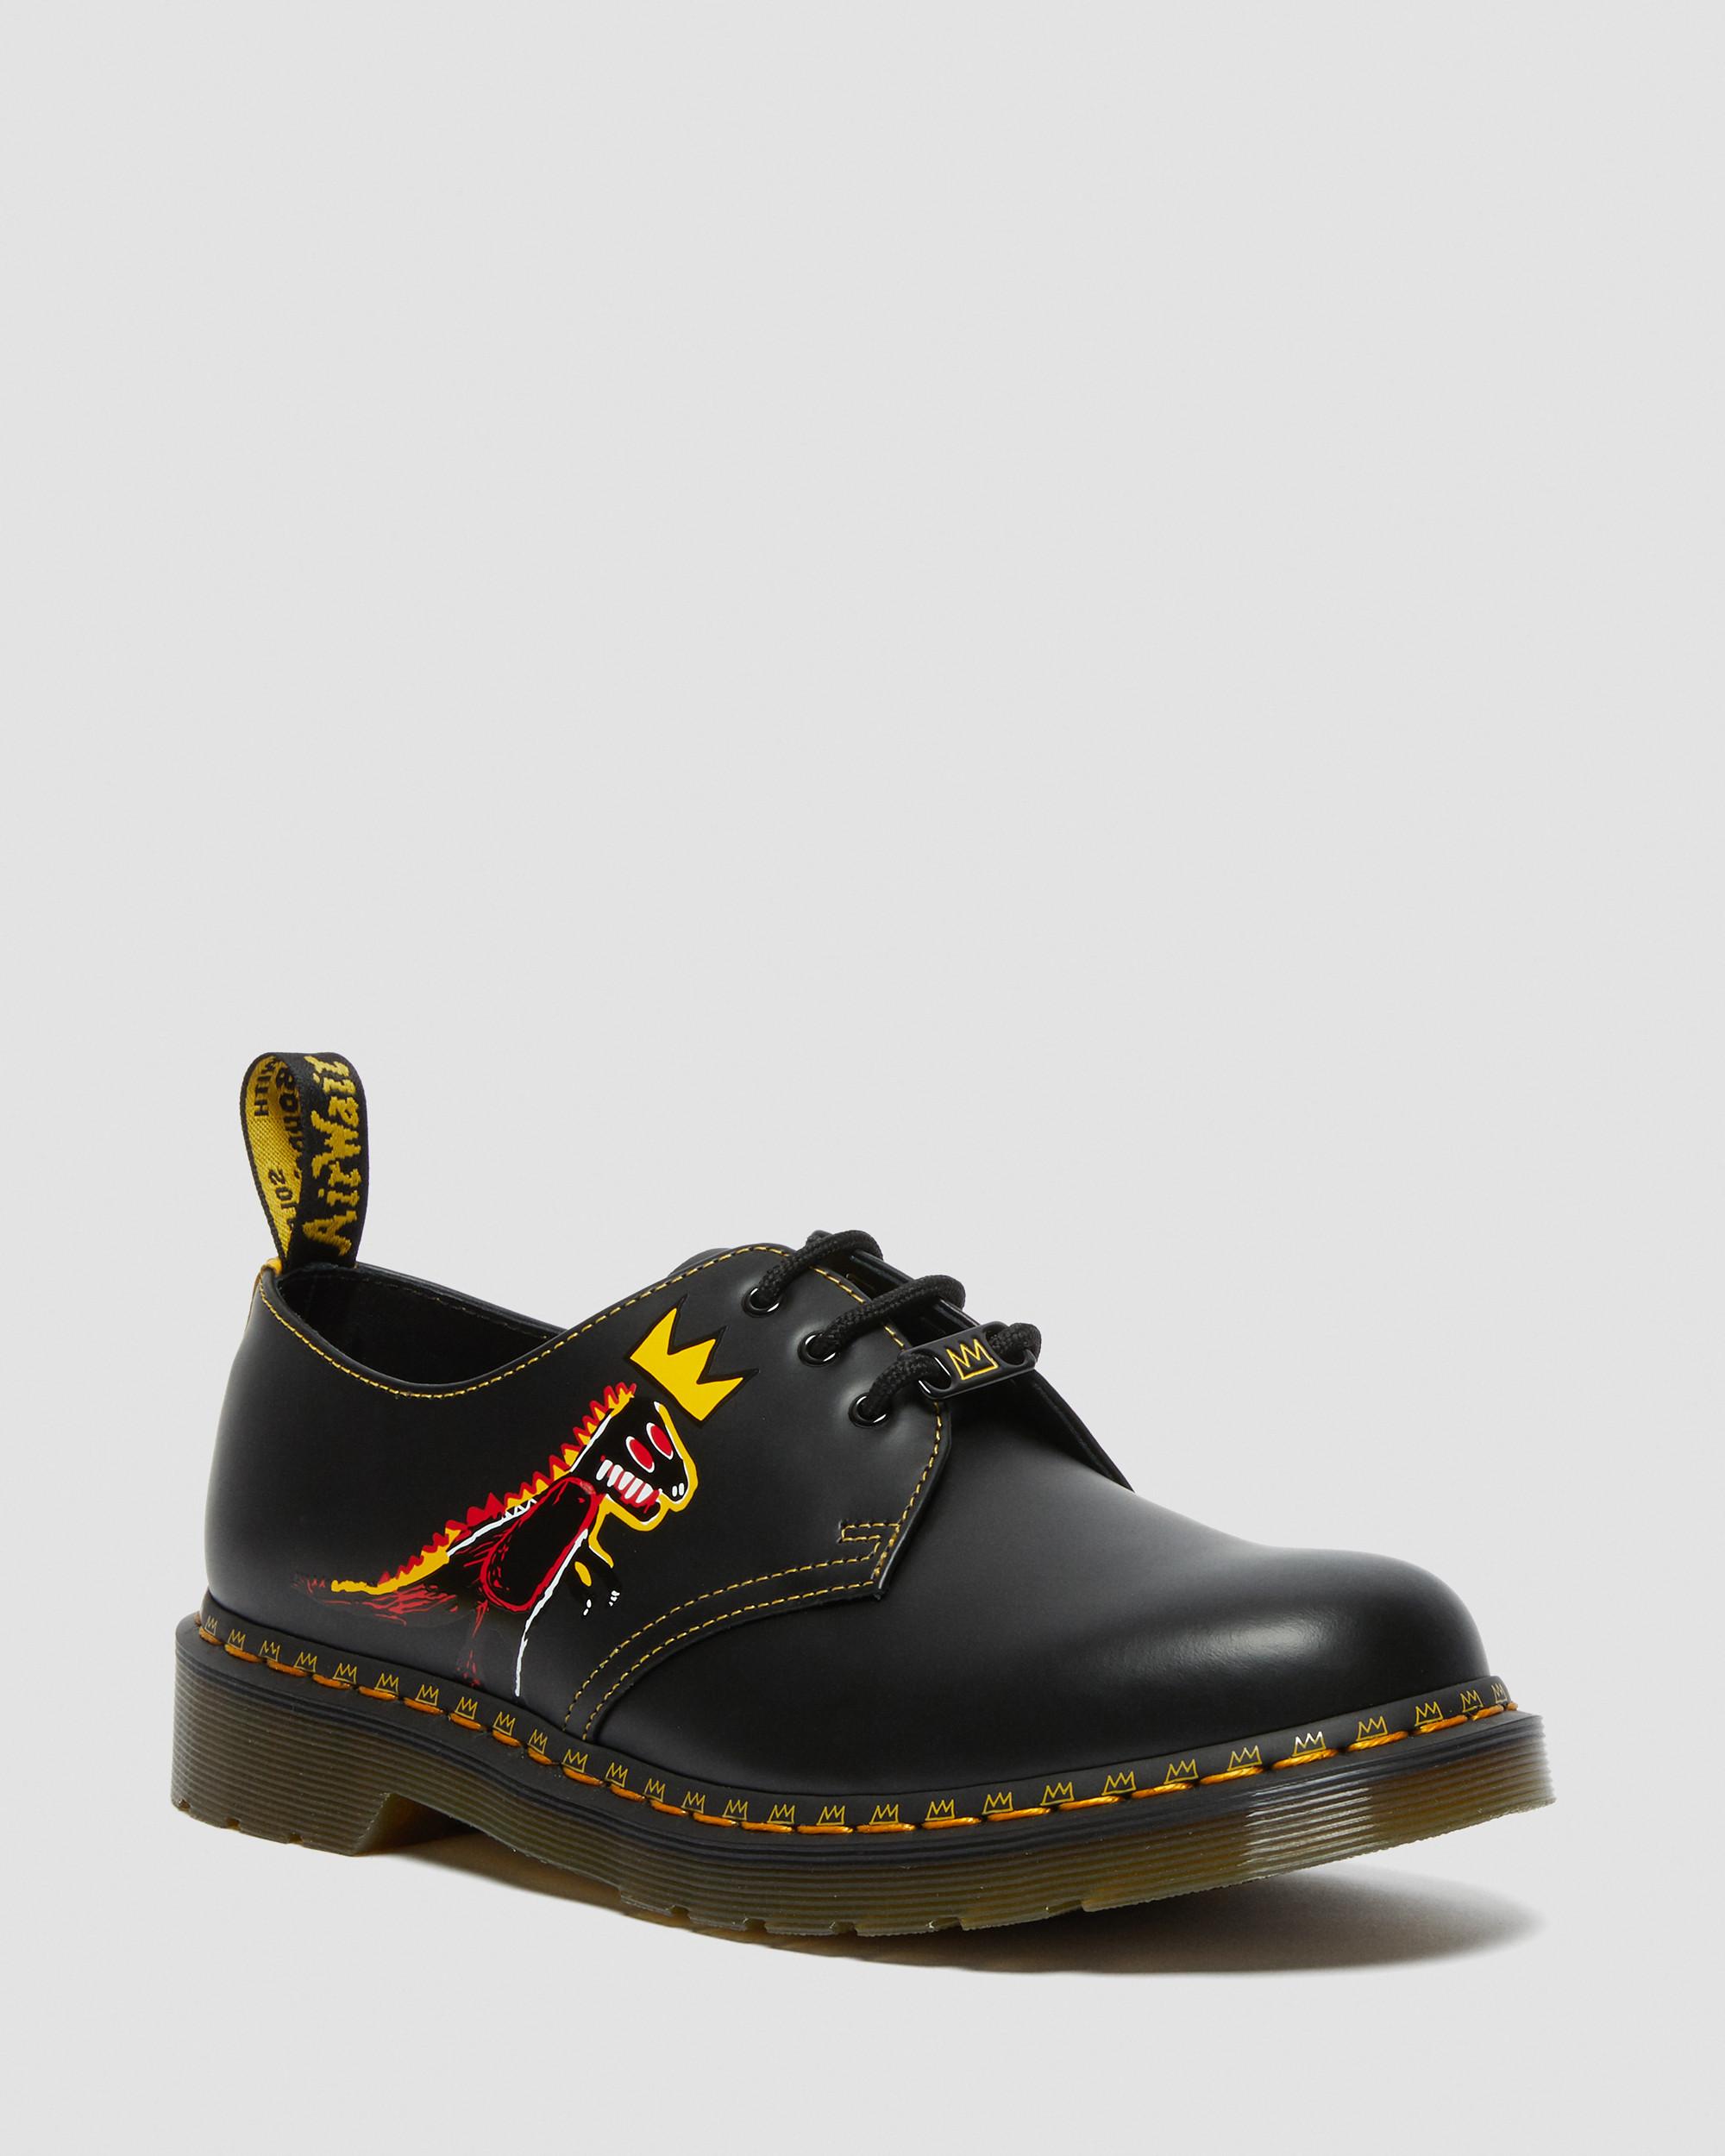 1461 Basquiat Leather Oxford Shoes​ in Black | Dr. Martens